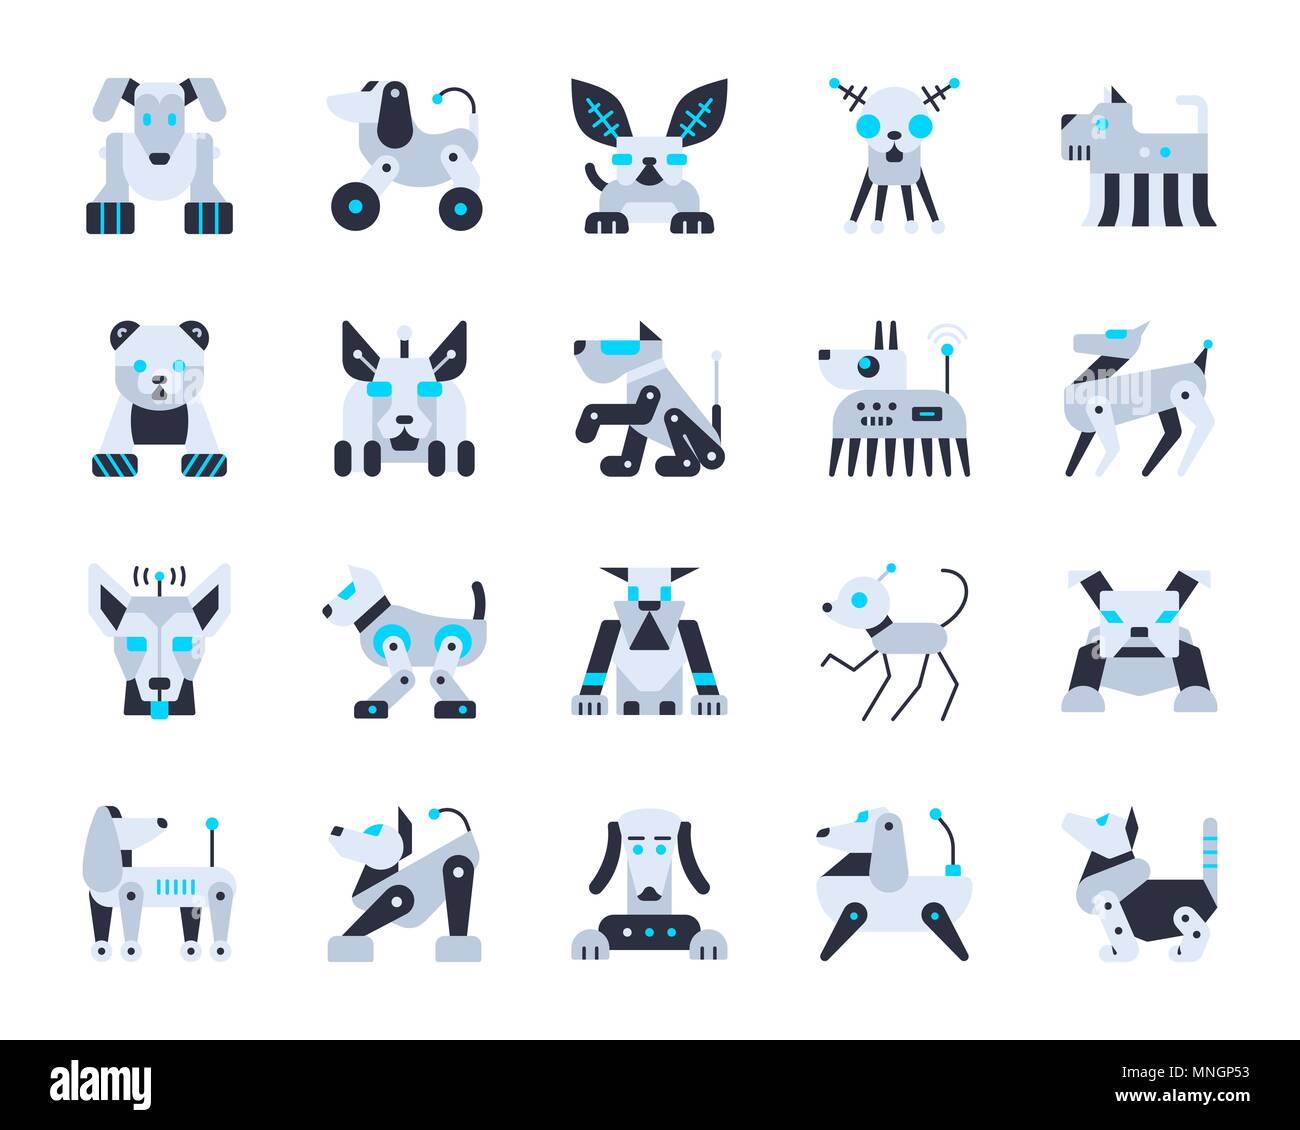 Robot Dog flat icons set. Web sign kit of pet. Cute Character pictogram collection includes transformer, machine, cyborg. Simple robot dog cartoon col Stock Vector